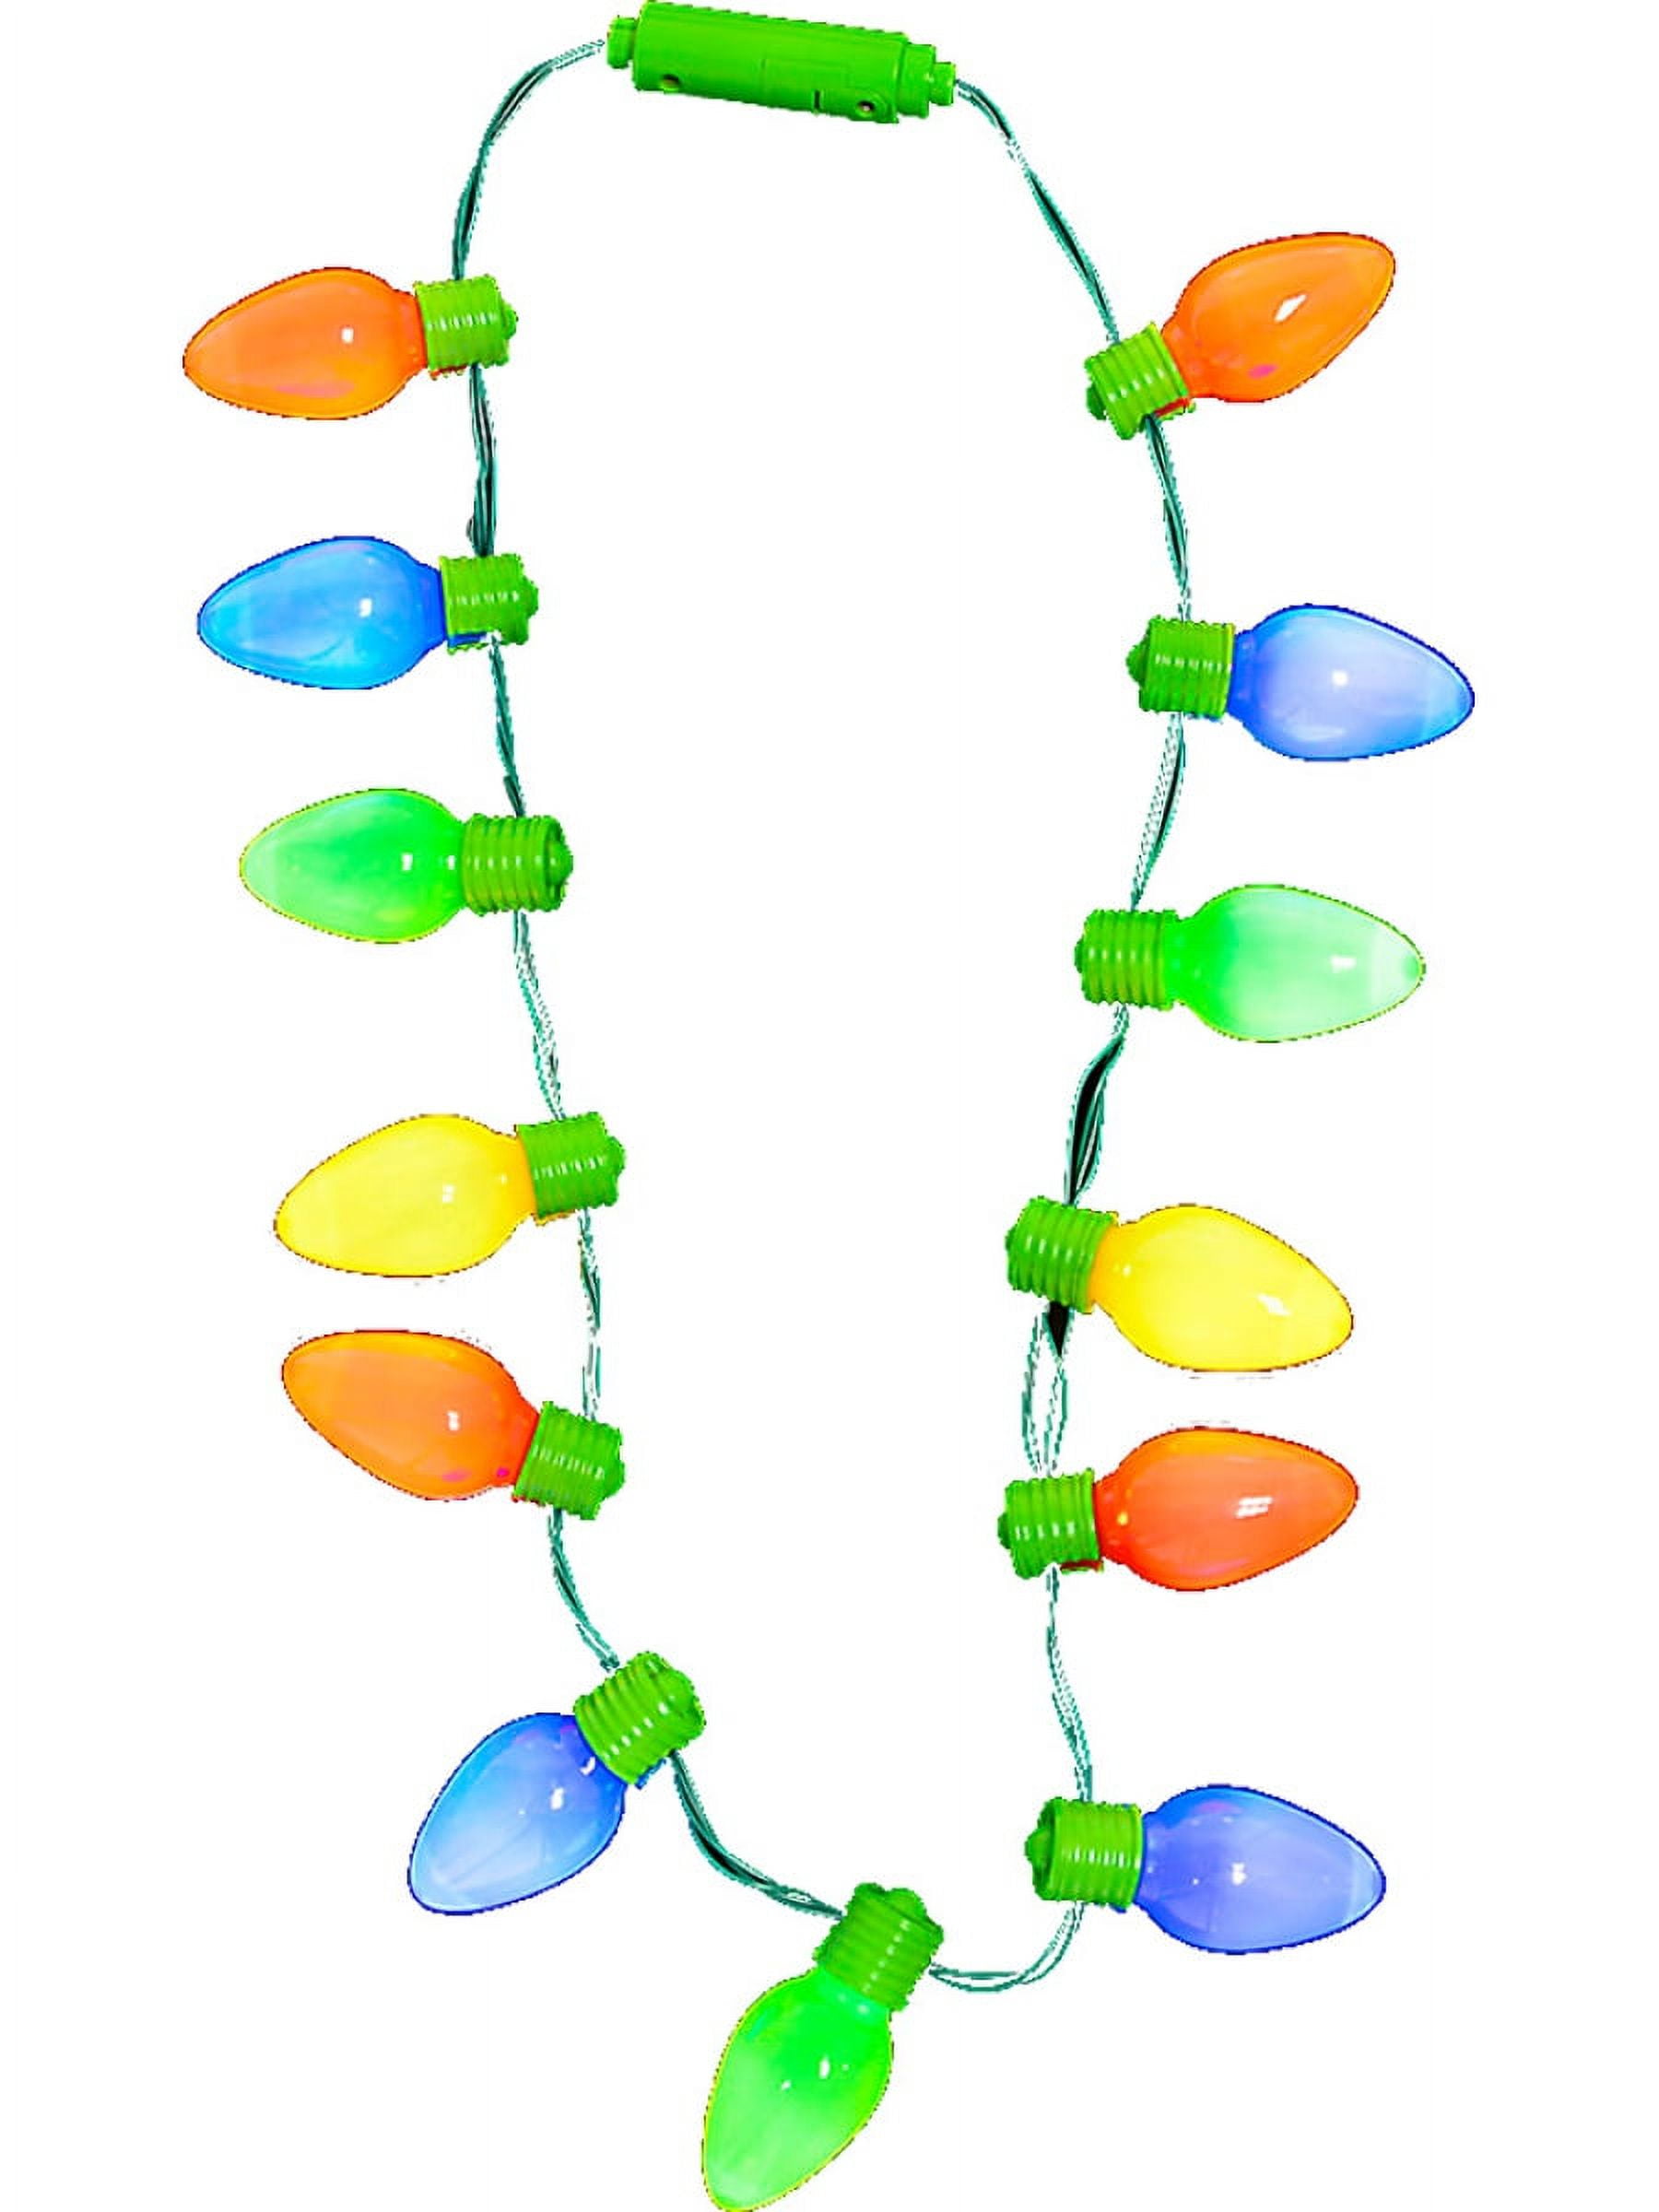 Buy Christmas Lights Necklace Online in India - Etsy